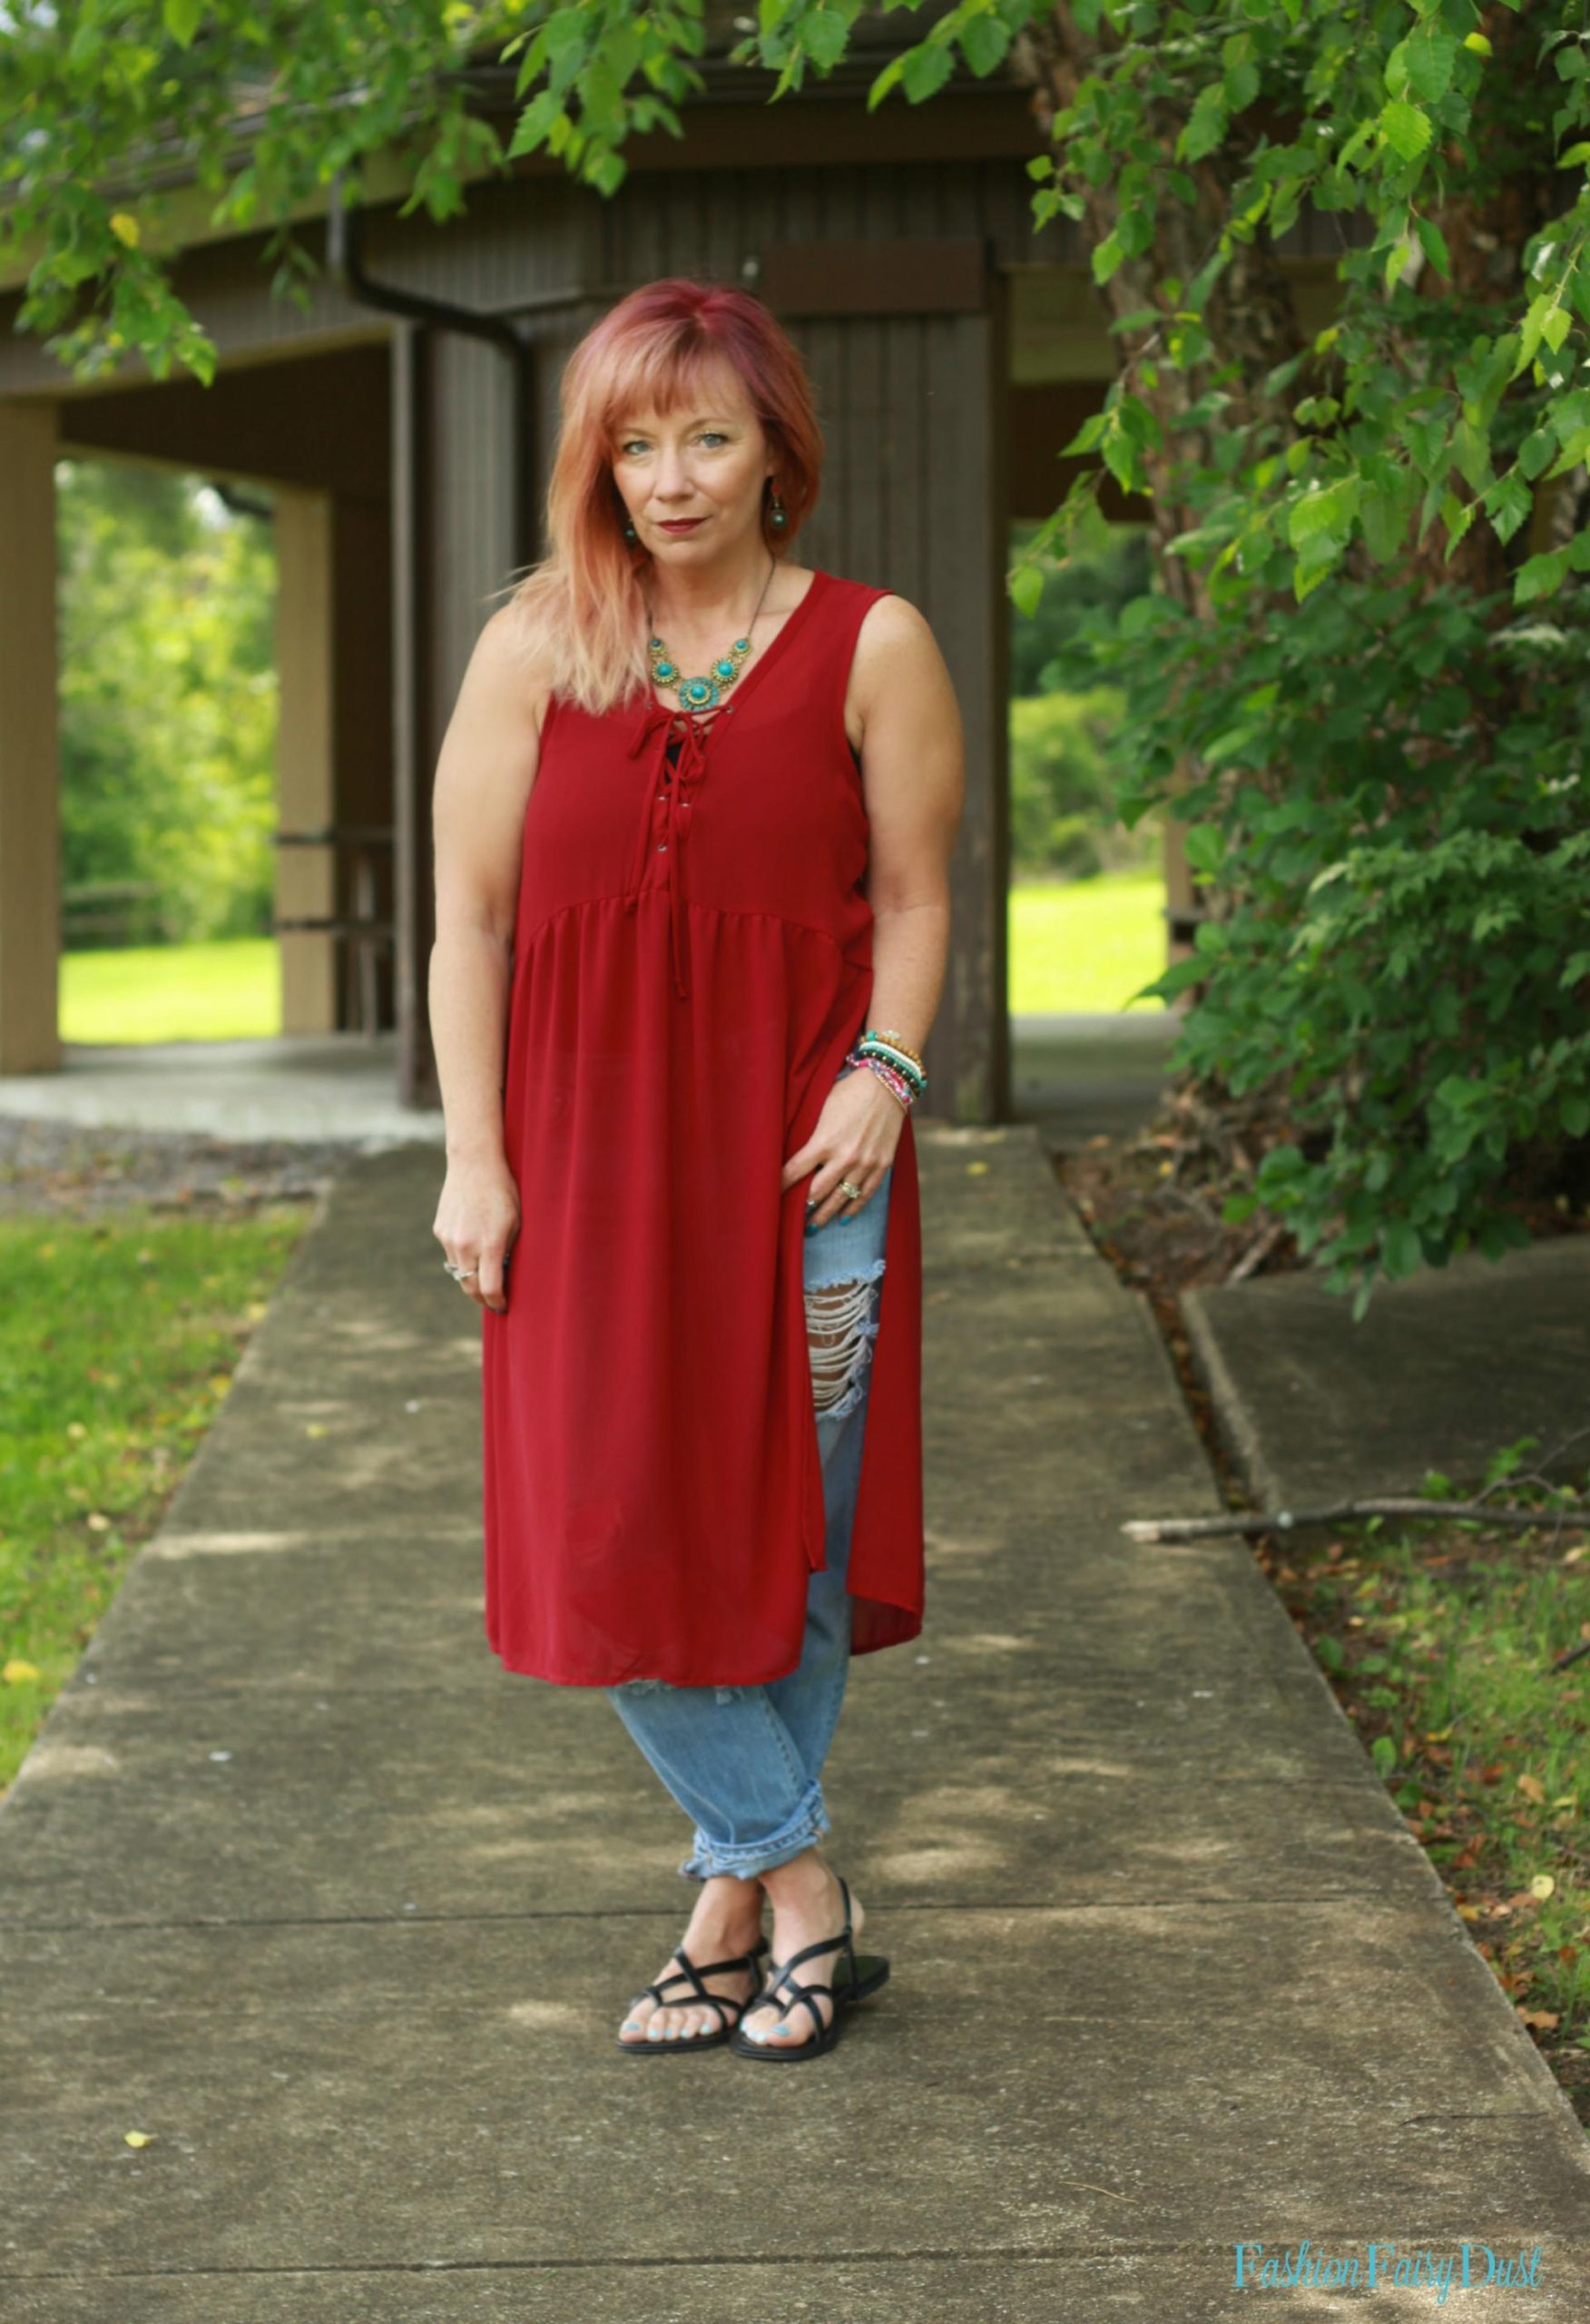 Tunic tank top, boyfriend jeans and embroidered bag.